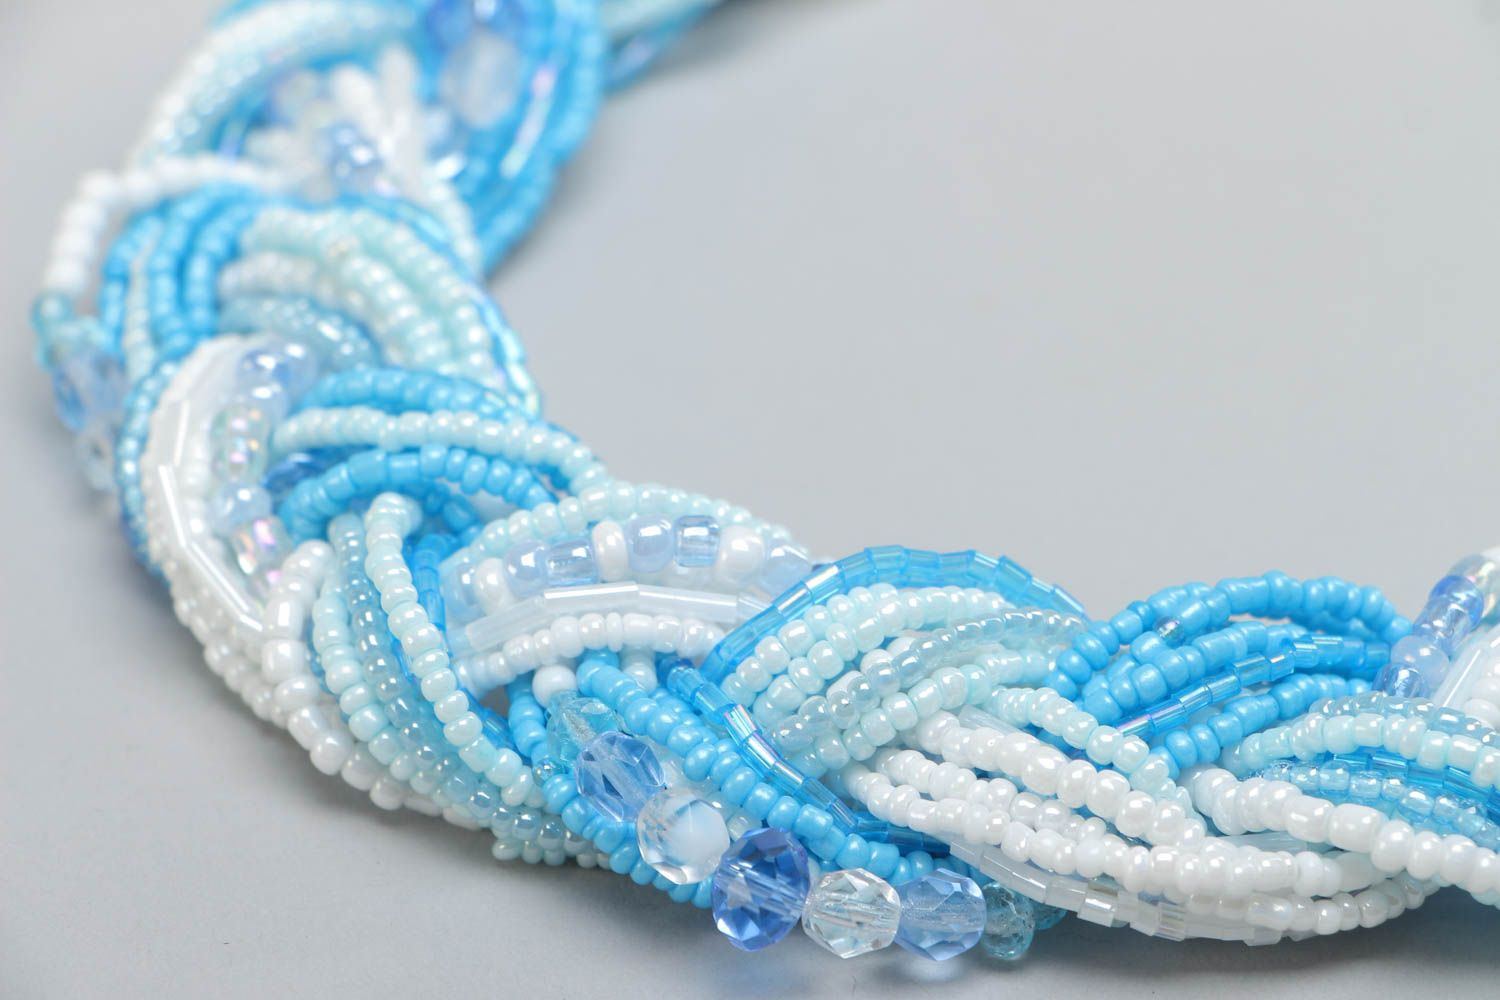 Handmade volume designer necklace woven of blue and white beads for women photo 3